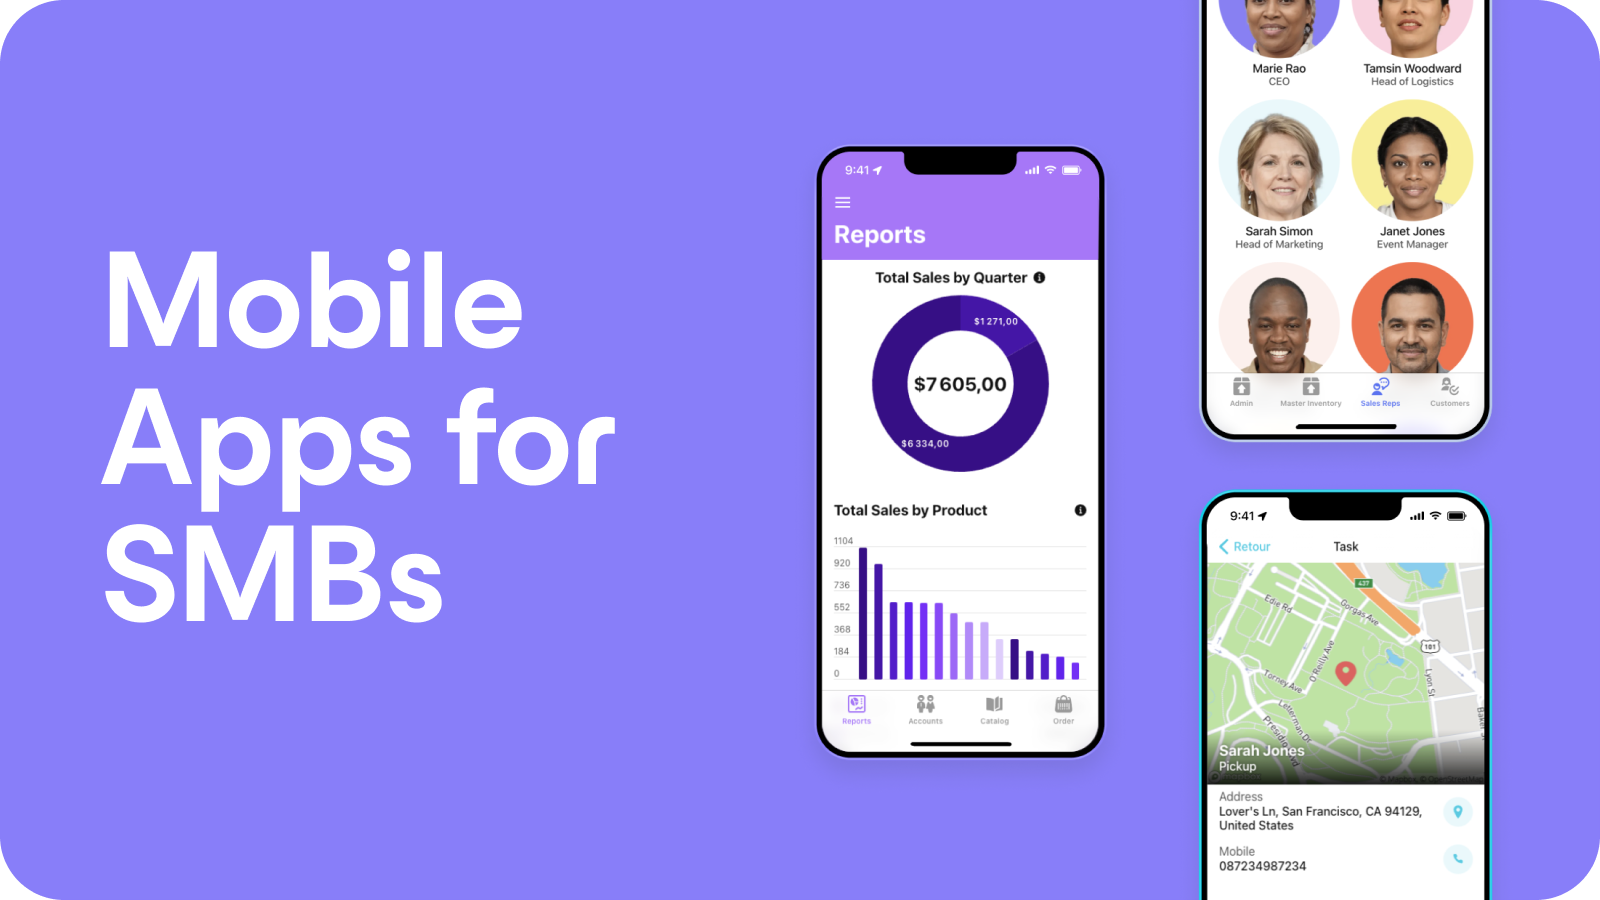 A Complete Guide to Mobile App Benefits and Use Cases: 6 Examples